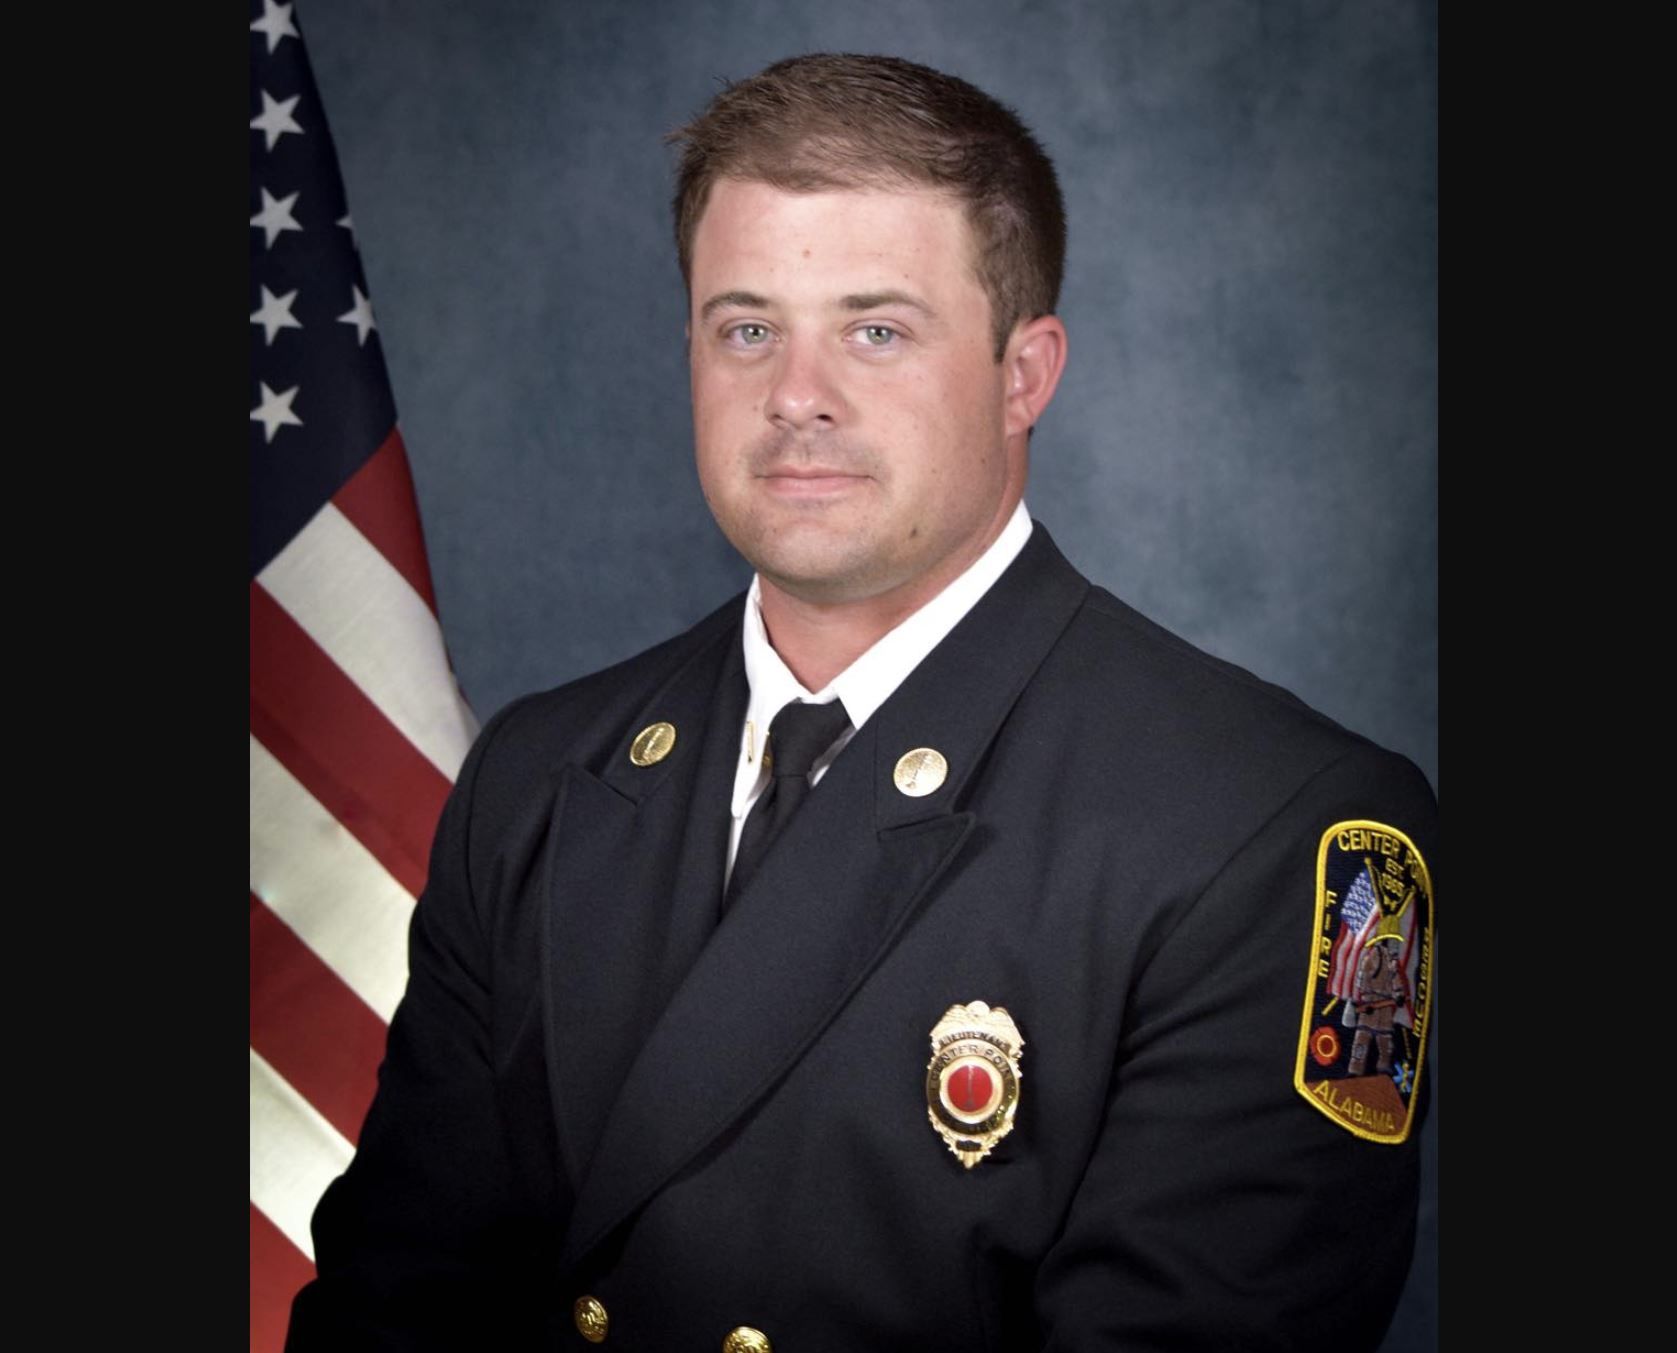 Firefighter with Center Point Fire and Oneonta Fire dies